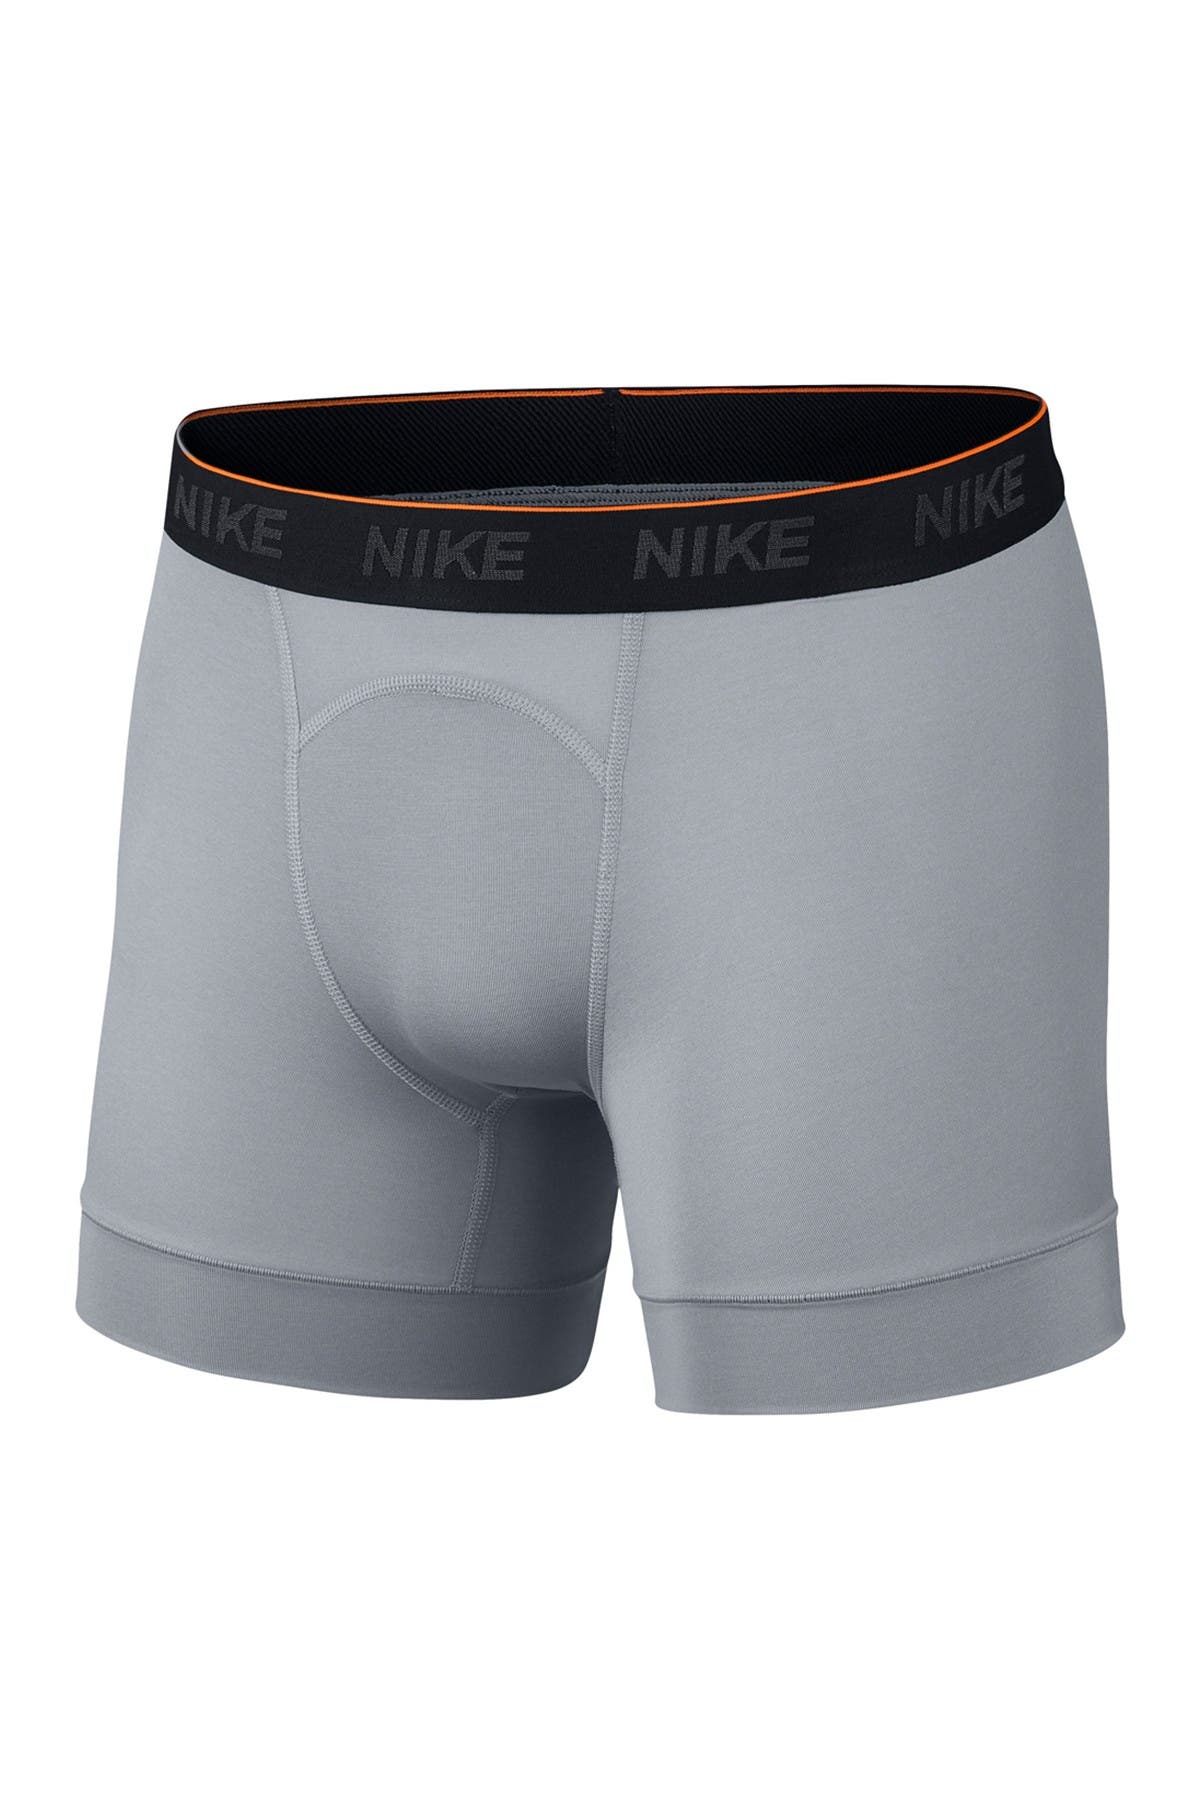 Nike | Training Boxer Briefs - Pack of 